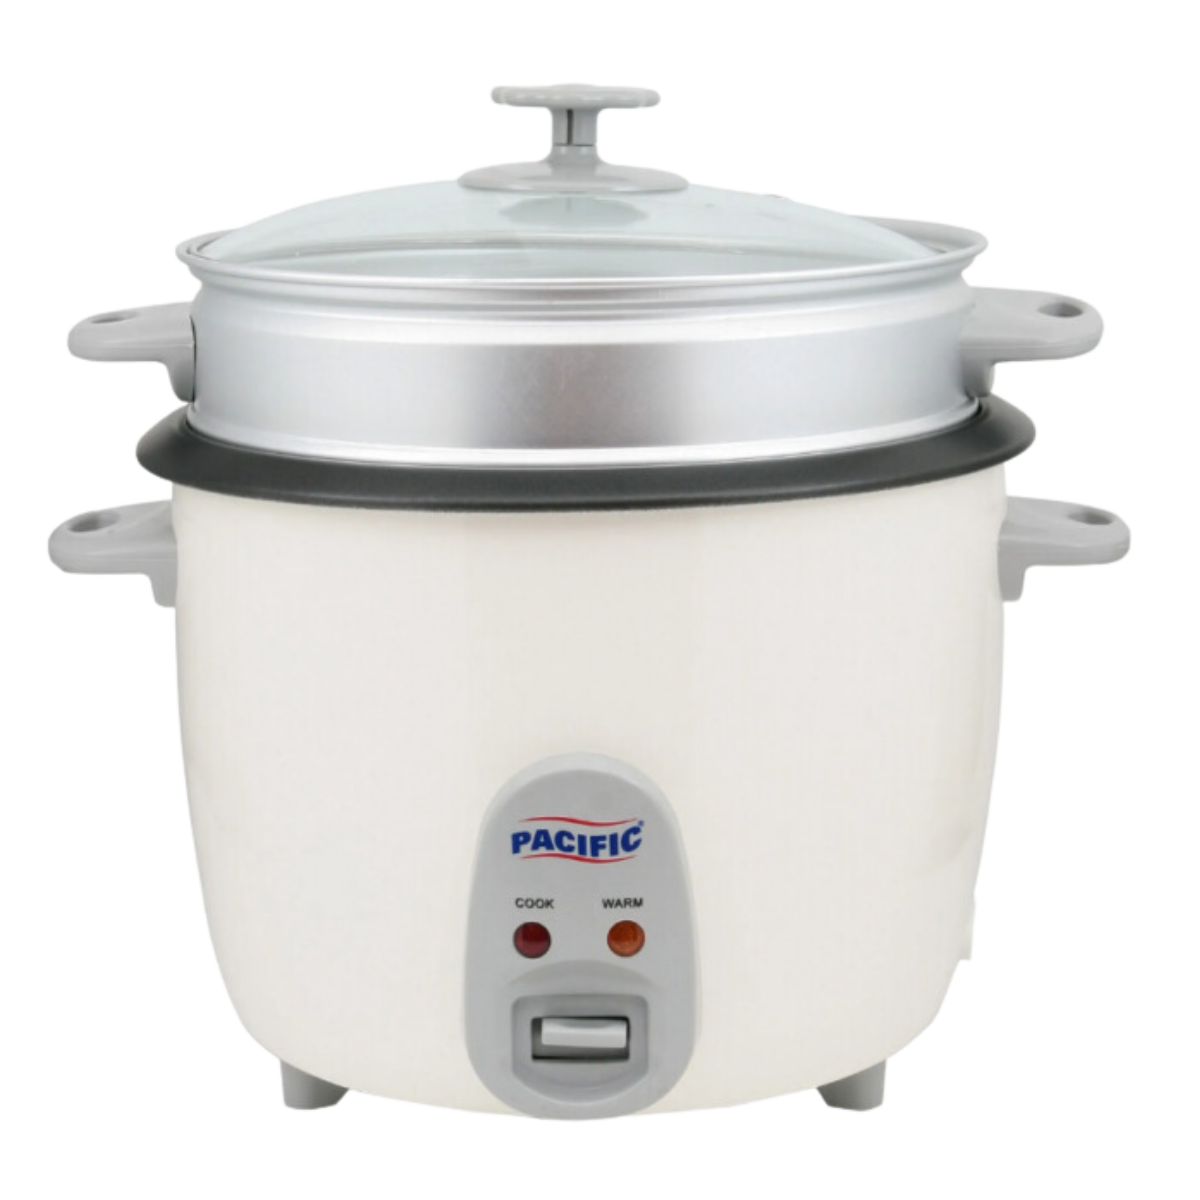 PACIFIC PCK218 RICE COOKER 2.8L